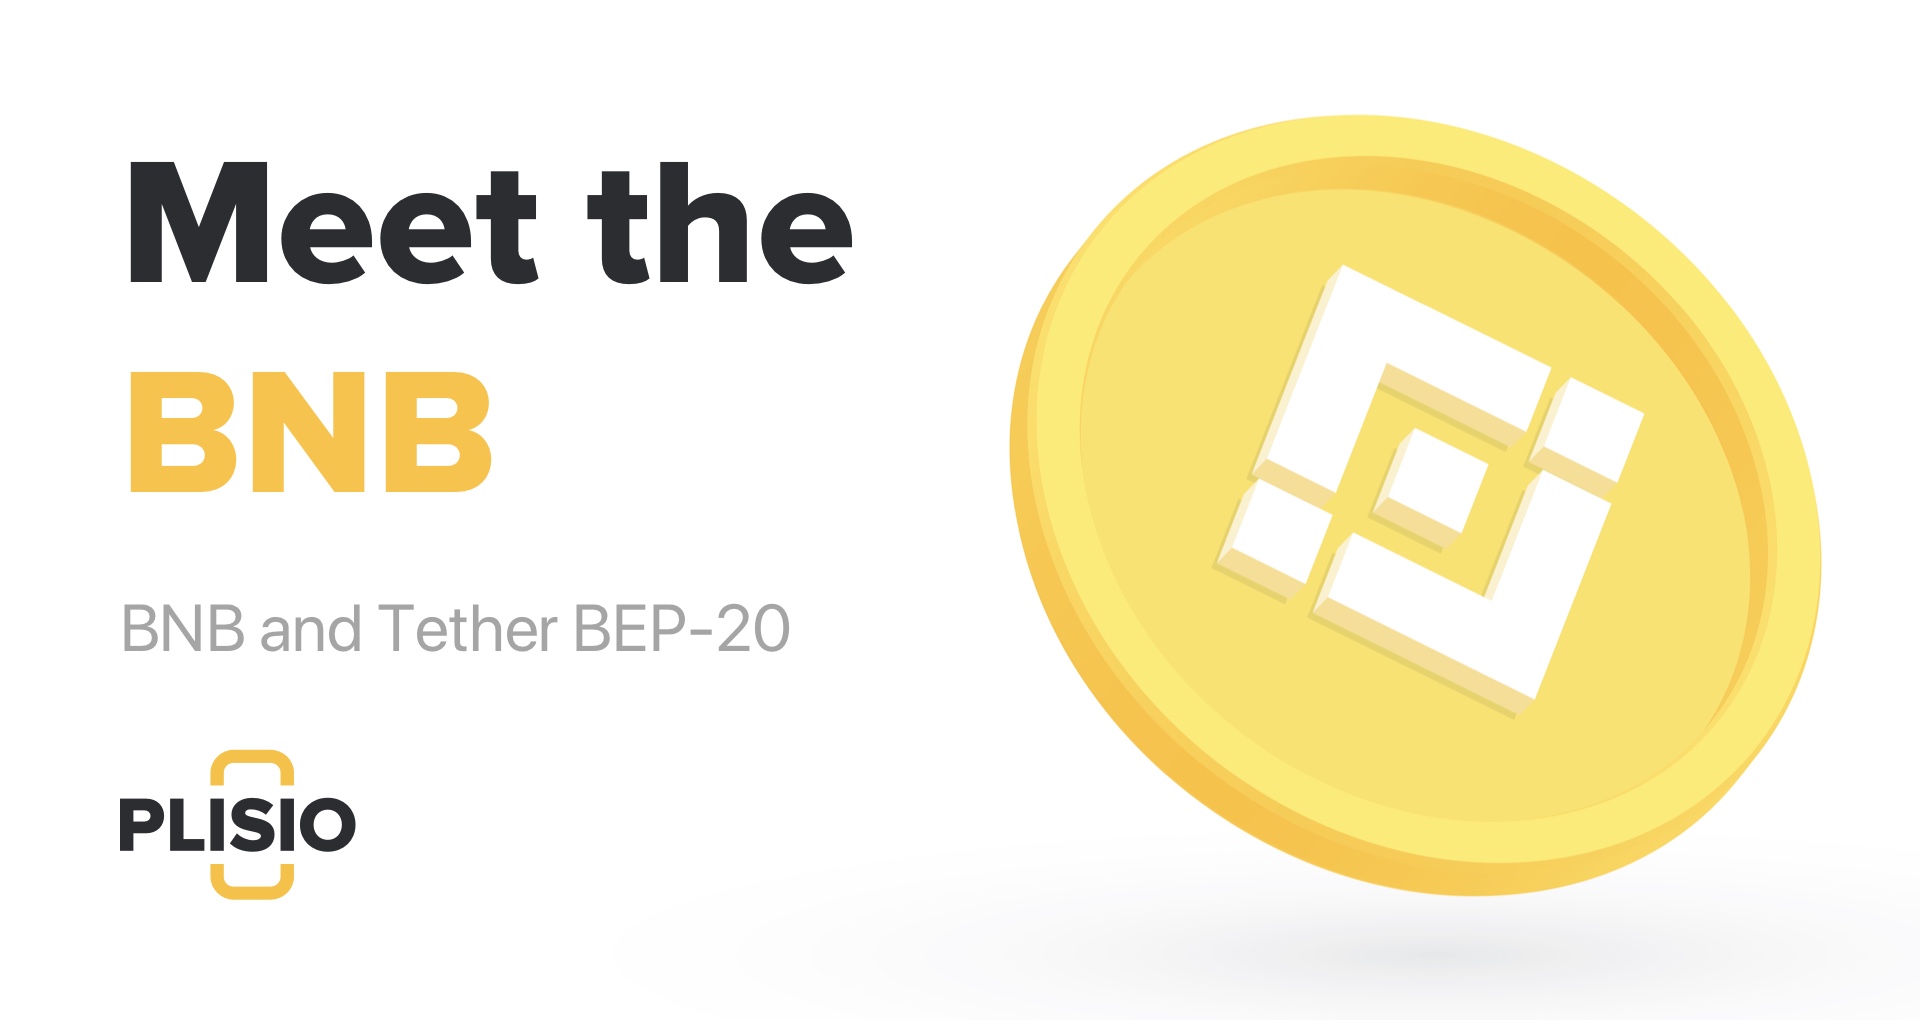 BNB, BUSD and USDT BEP-20 are available. Integrate them now!